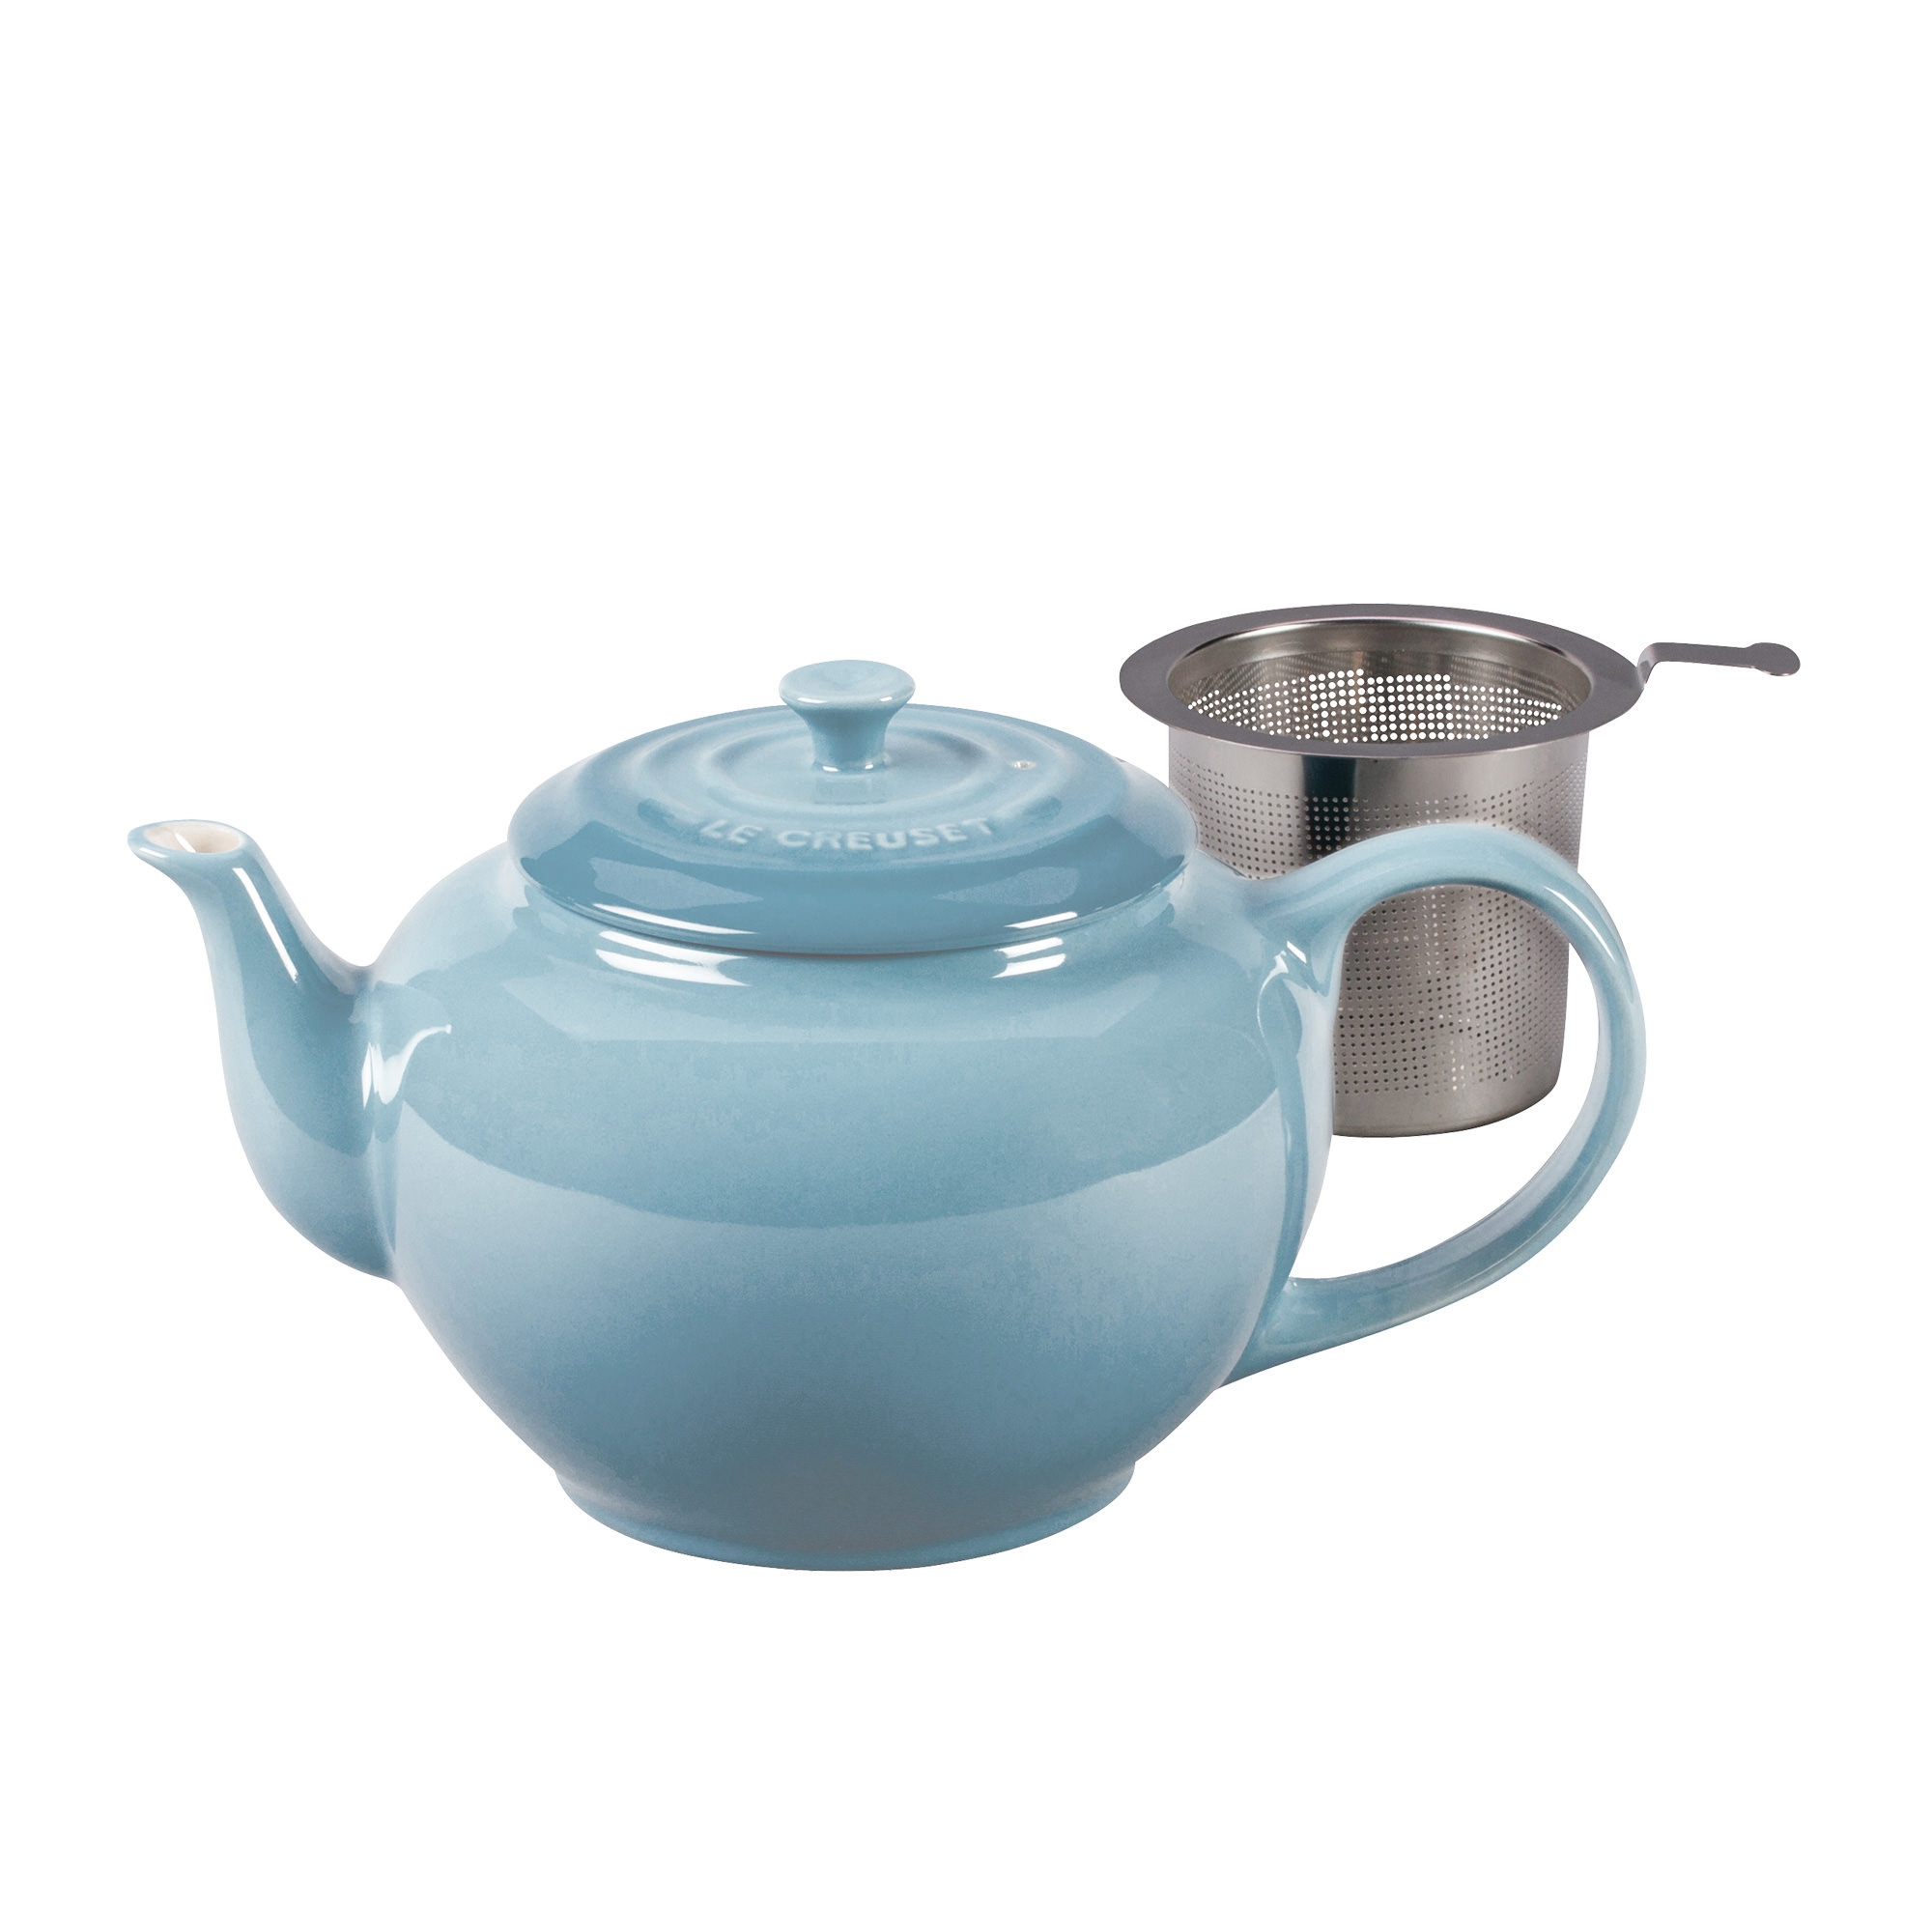 Le Creuset Classic Teapot with Stainless Steel Infuser 1.3L Coastal Blue Image 1